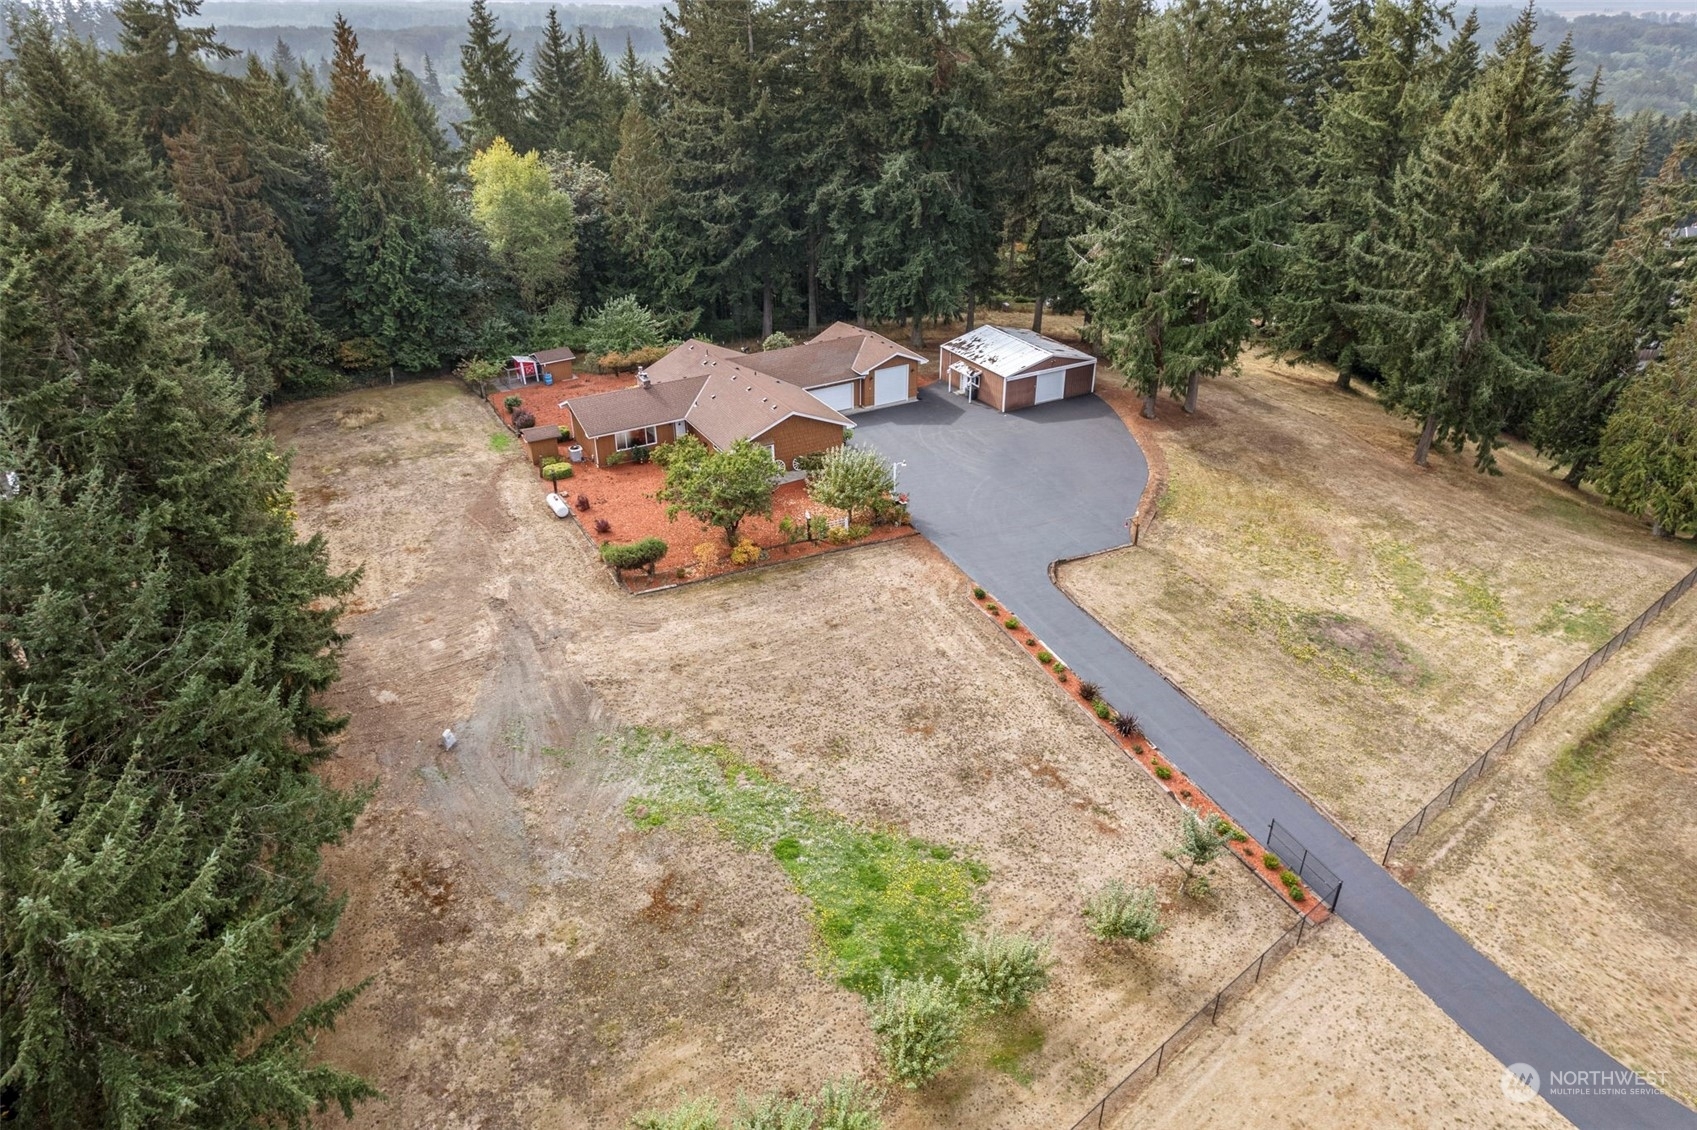 206 Pare Road  Kelso WA 98626 photo